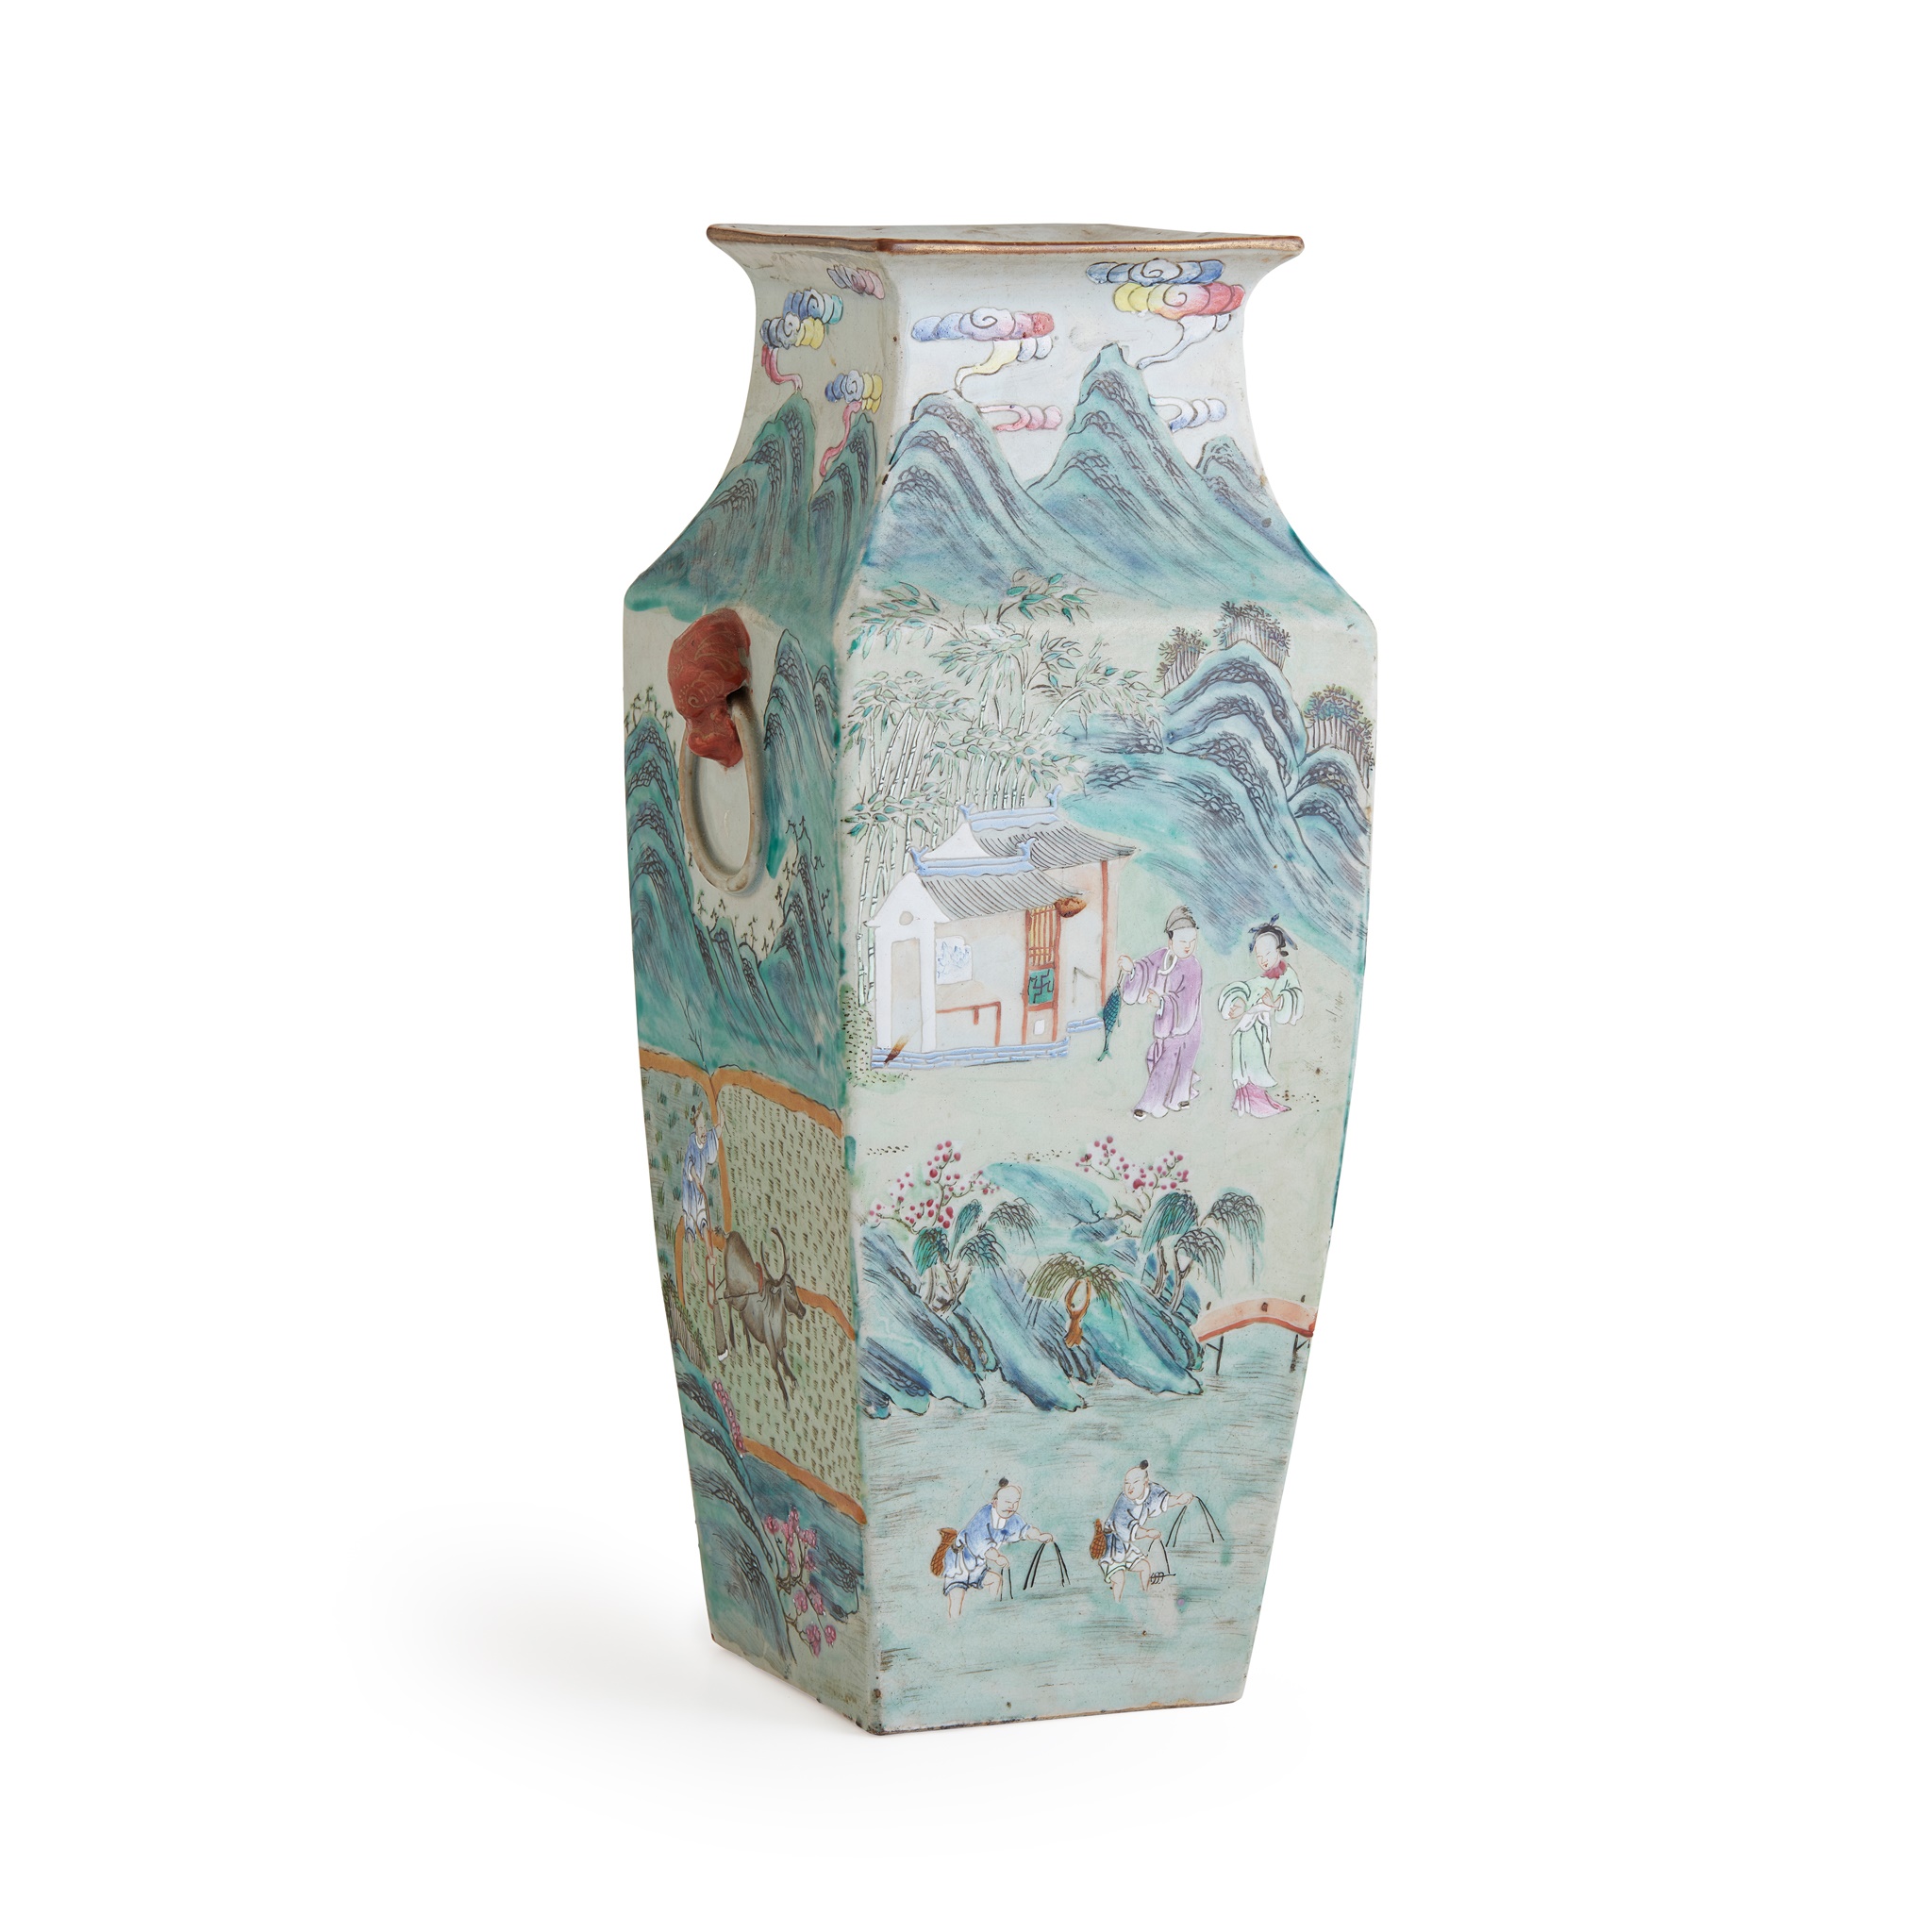 CHINESE FAMILLE ROSE FOUR-SECTIONED VASE QING DYNASTY, 19TH CENTURY